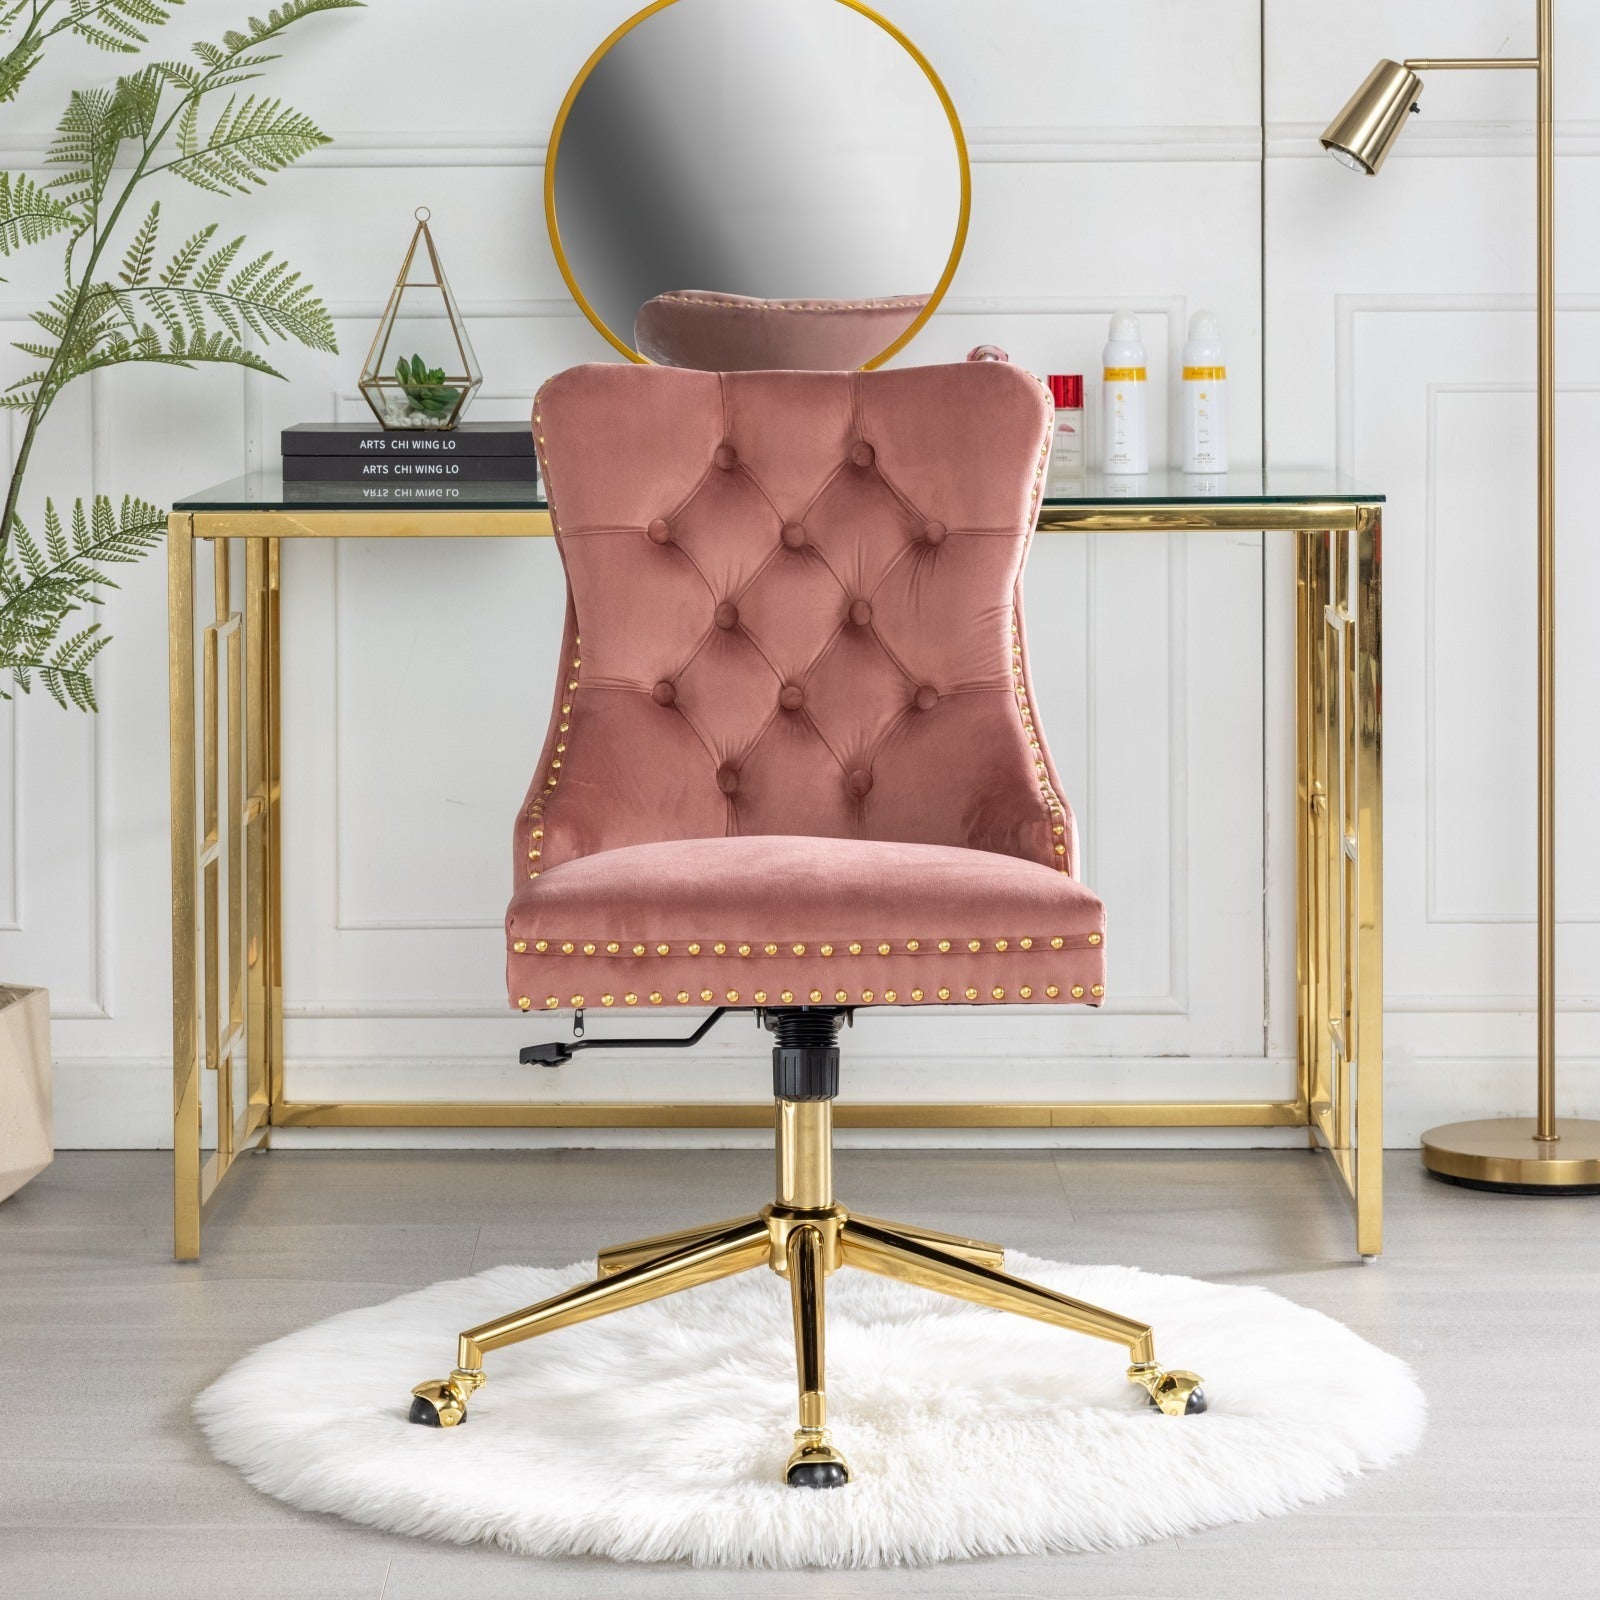 Velvet-Upholstered-Tufted-Chair-with-Golden-Metal-Adjustable-Swivel-Base-Pink-Chairs-&-Seating